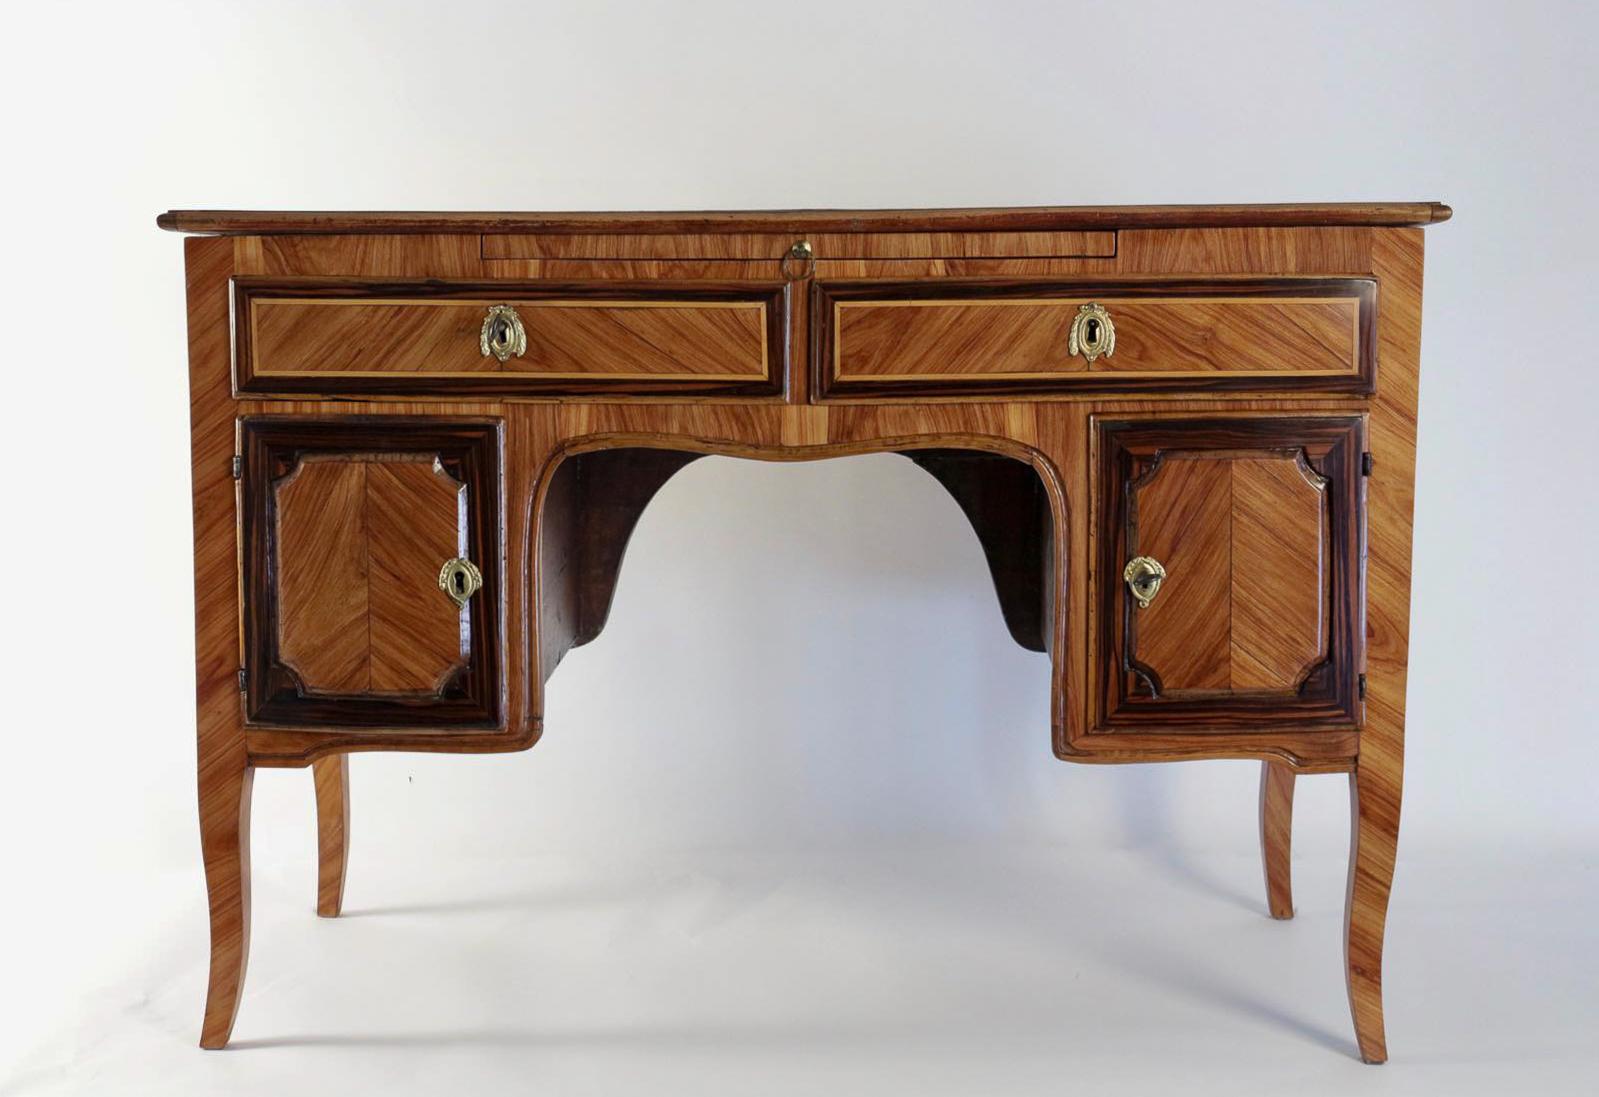 Italian flat-top desk, mid-18th century, circa 1750-1760

An excellent Italian flat top writing table in rosewood, lemonwood parquetry, opening with two drawers and two doors, at the top two writing sections. Our desk raised on four elegant